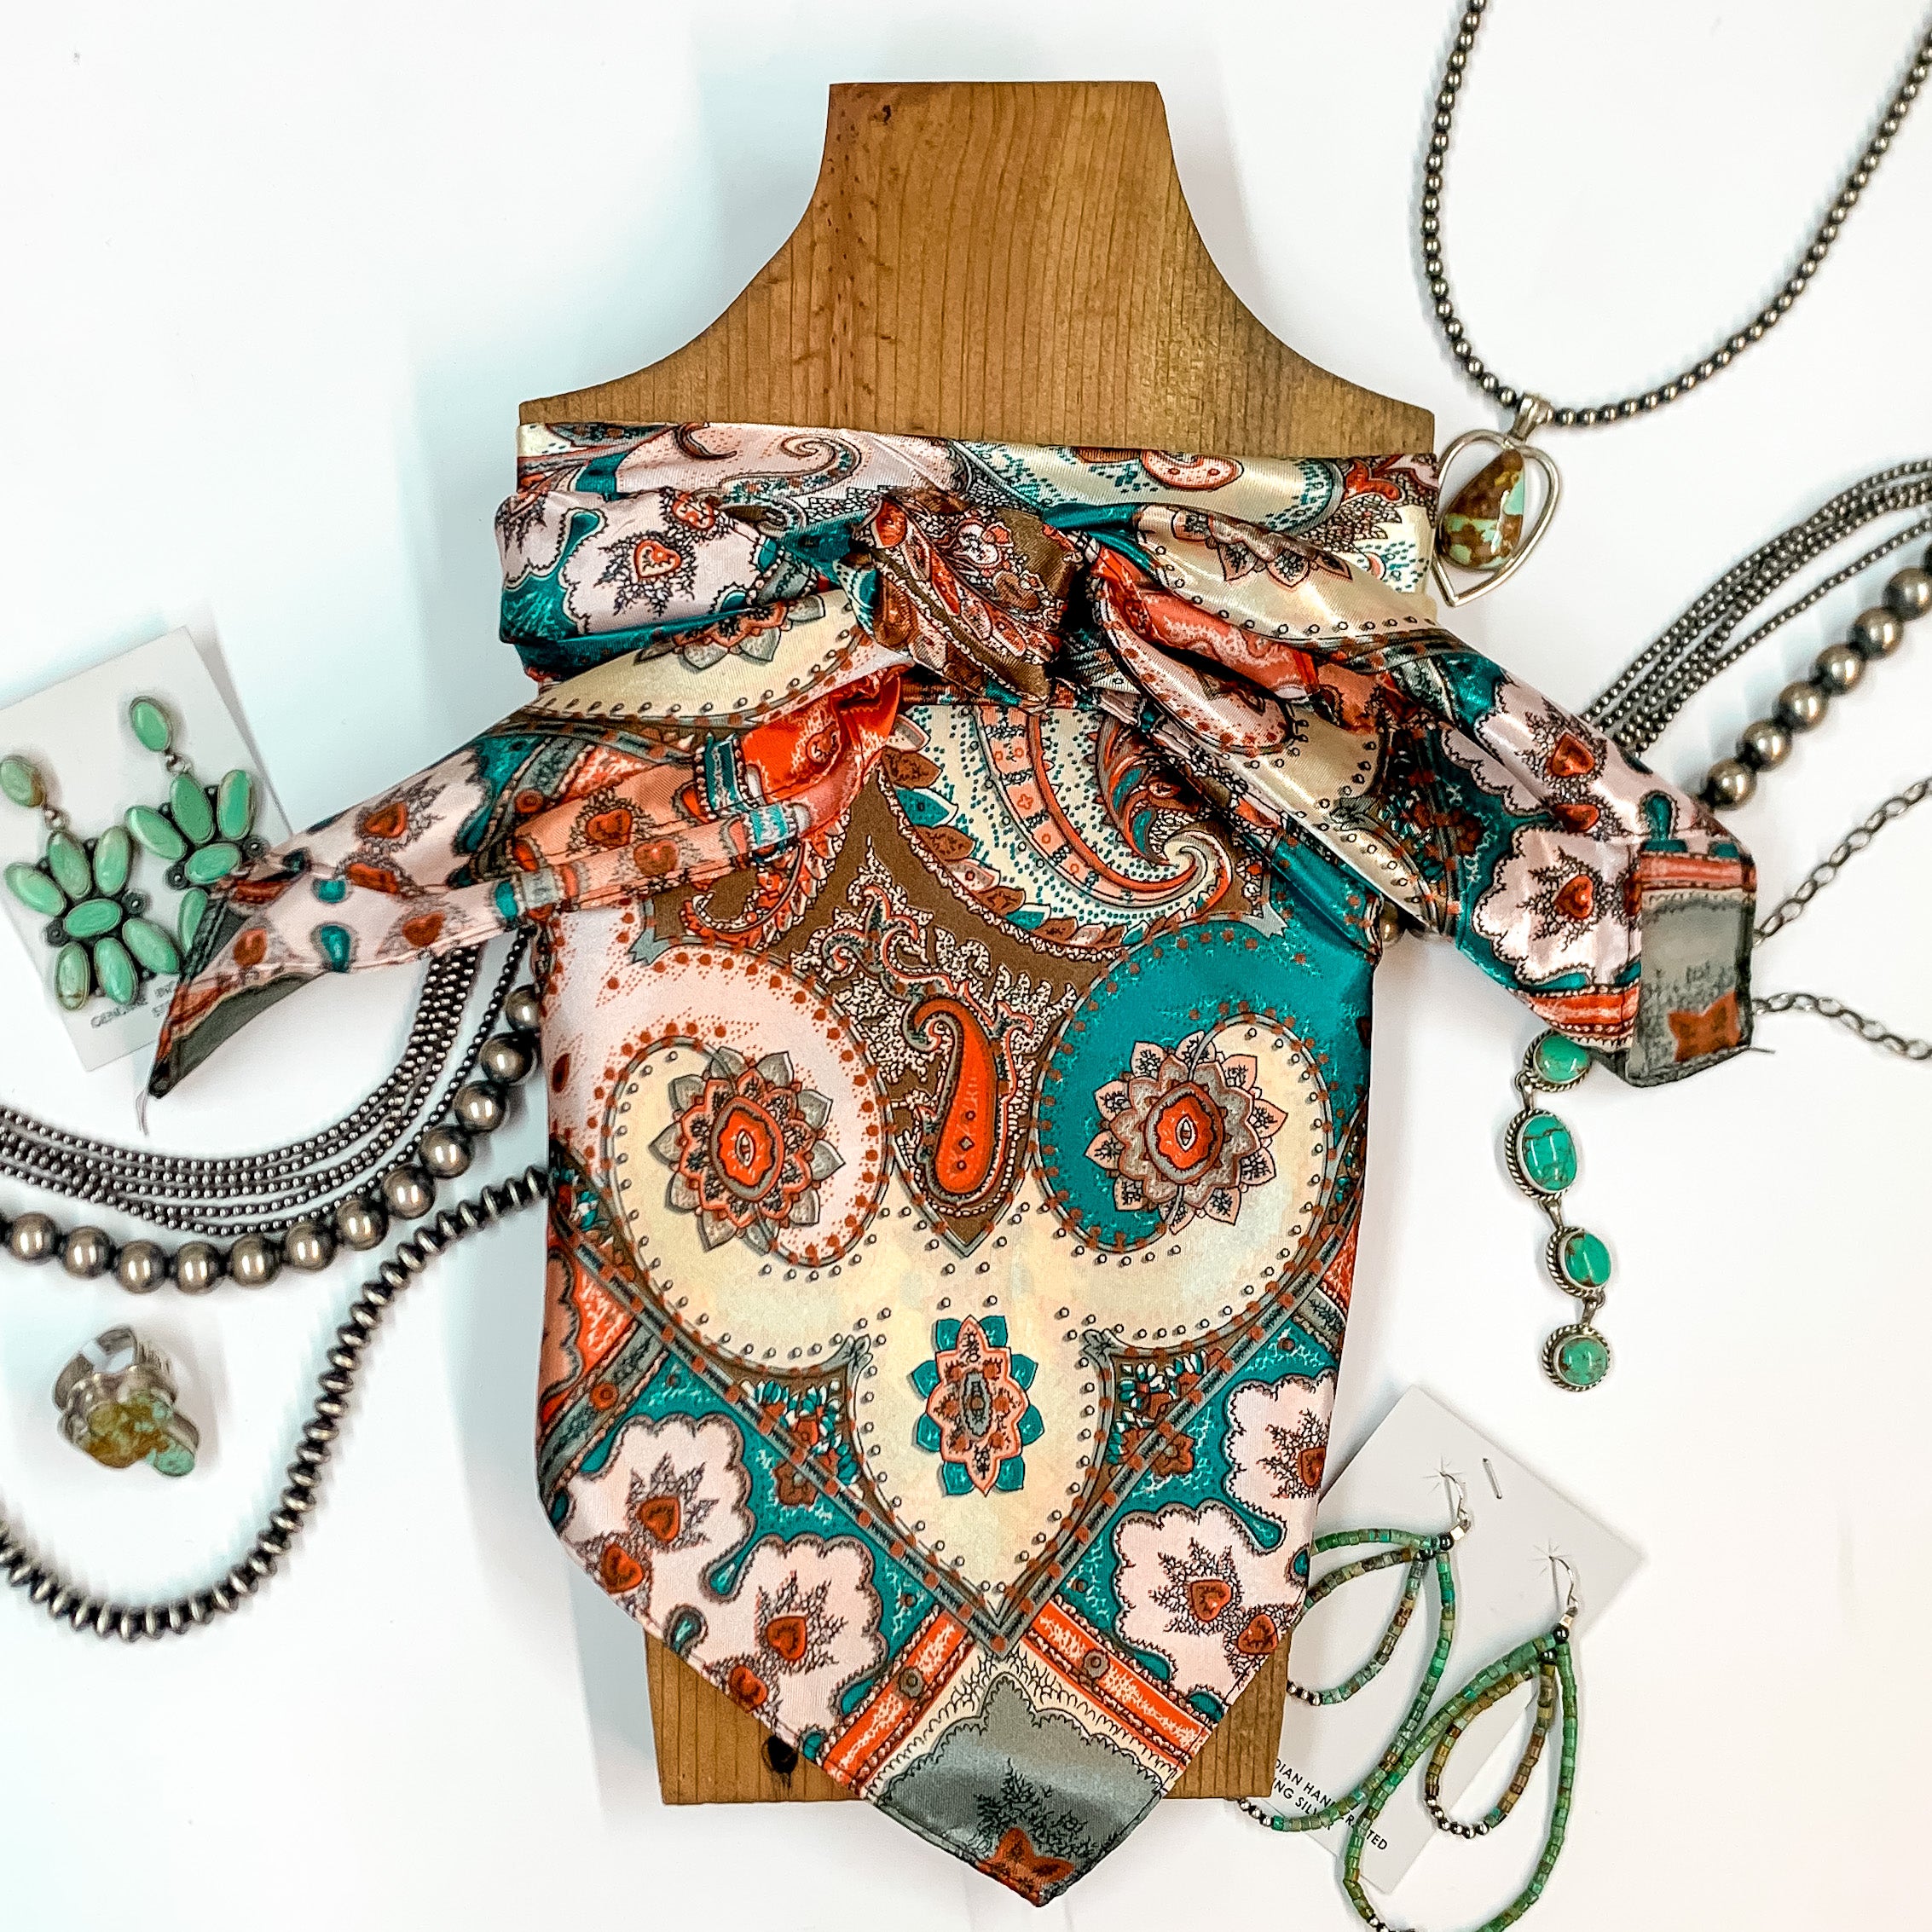 Patterned scarf in Greeley. Scarf is tied around a wooden piece. The scarf and piece of wood is pictured on a white background with Navajo jewelry spread out around it.